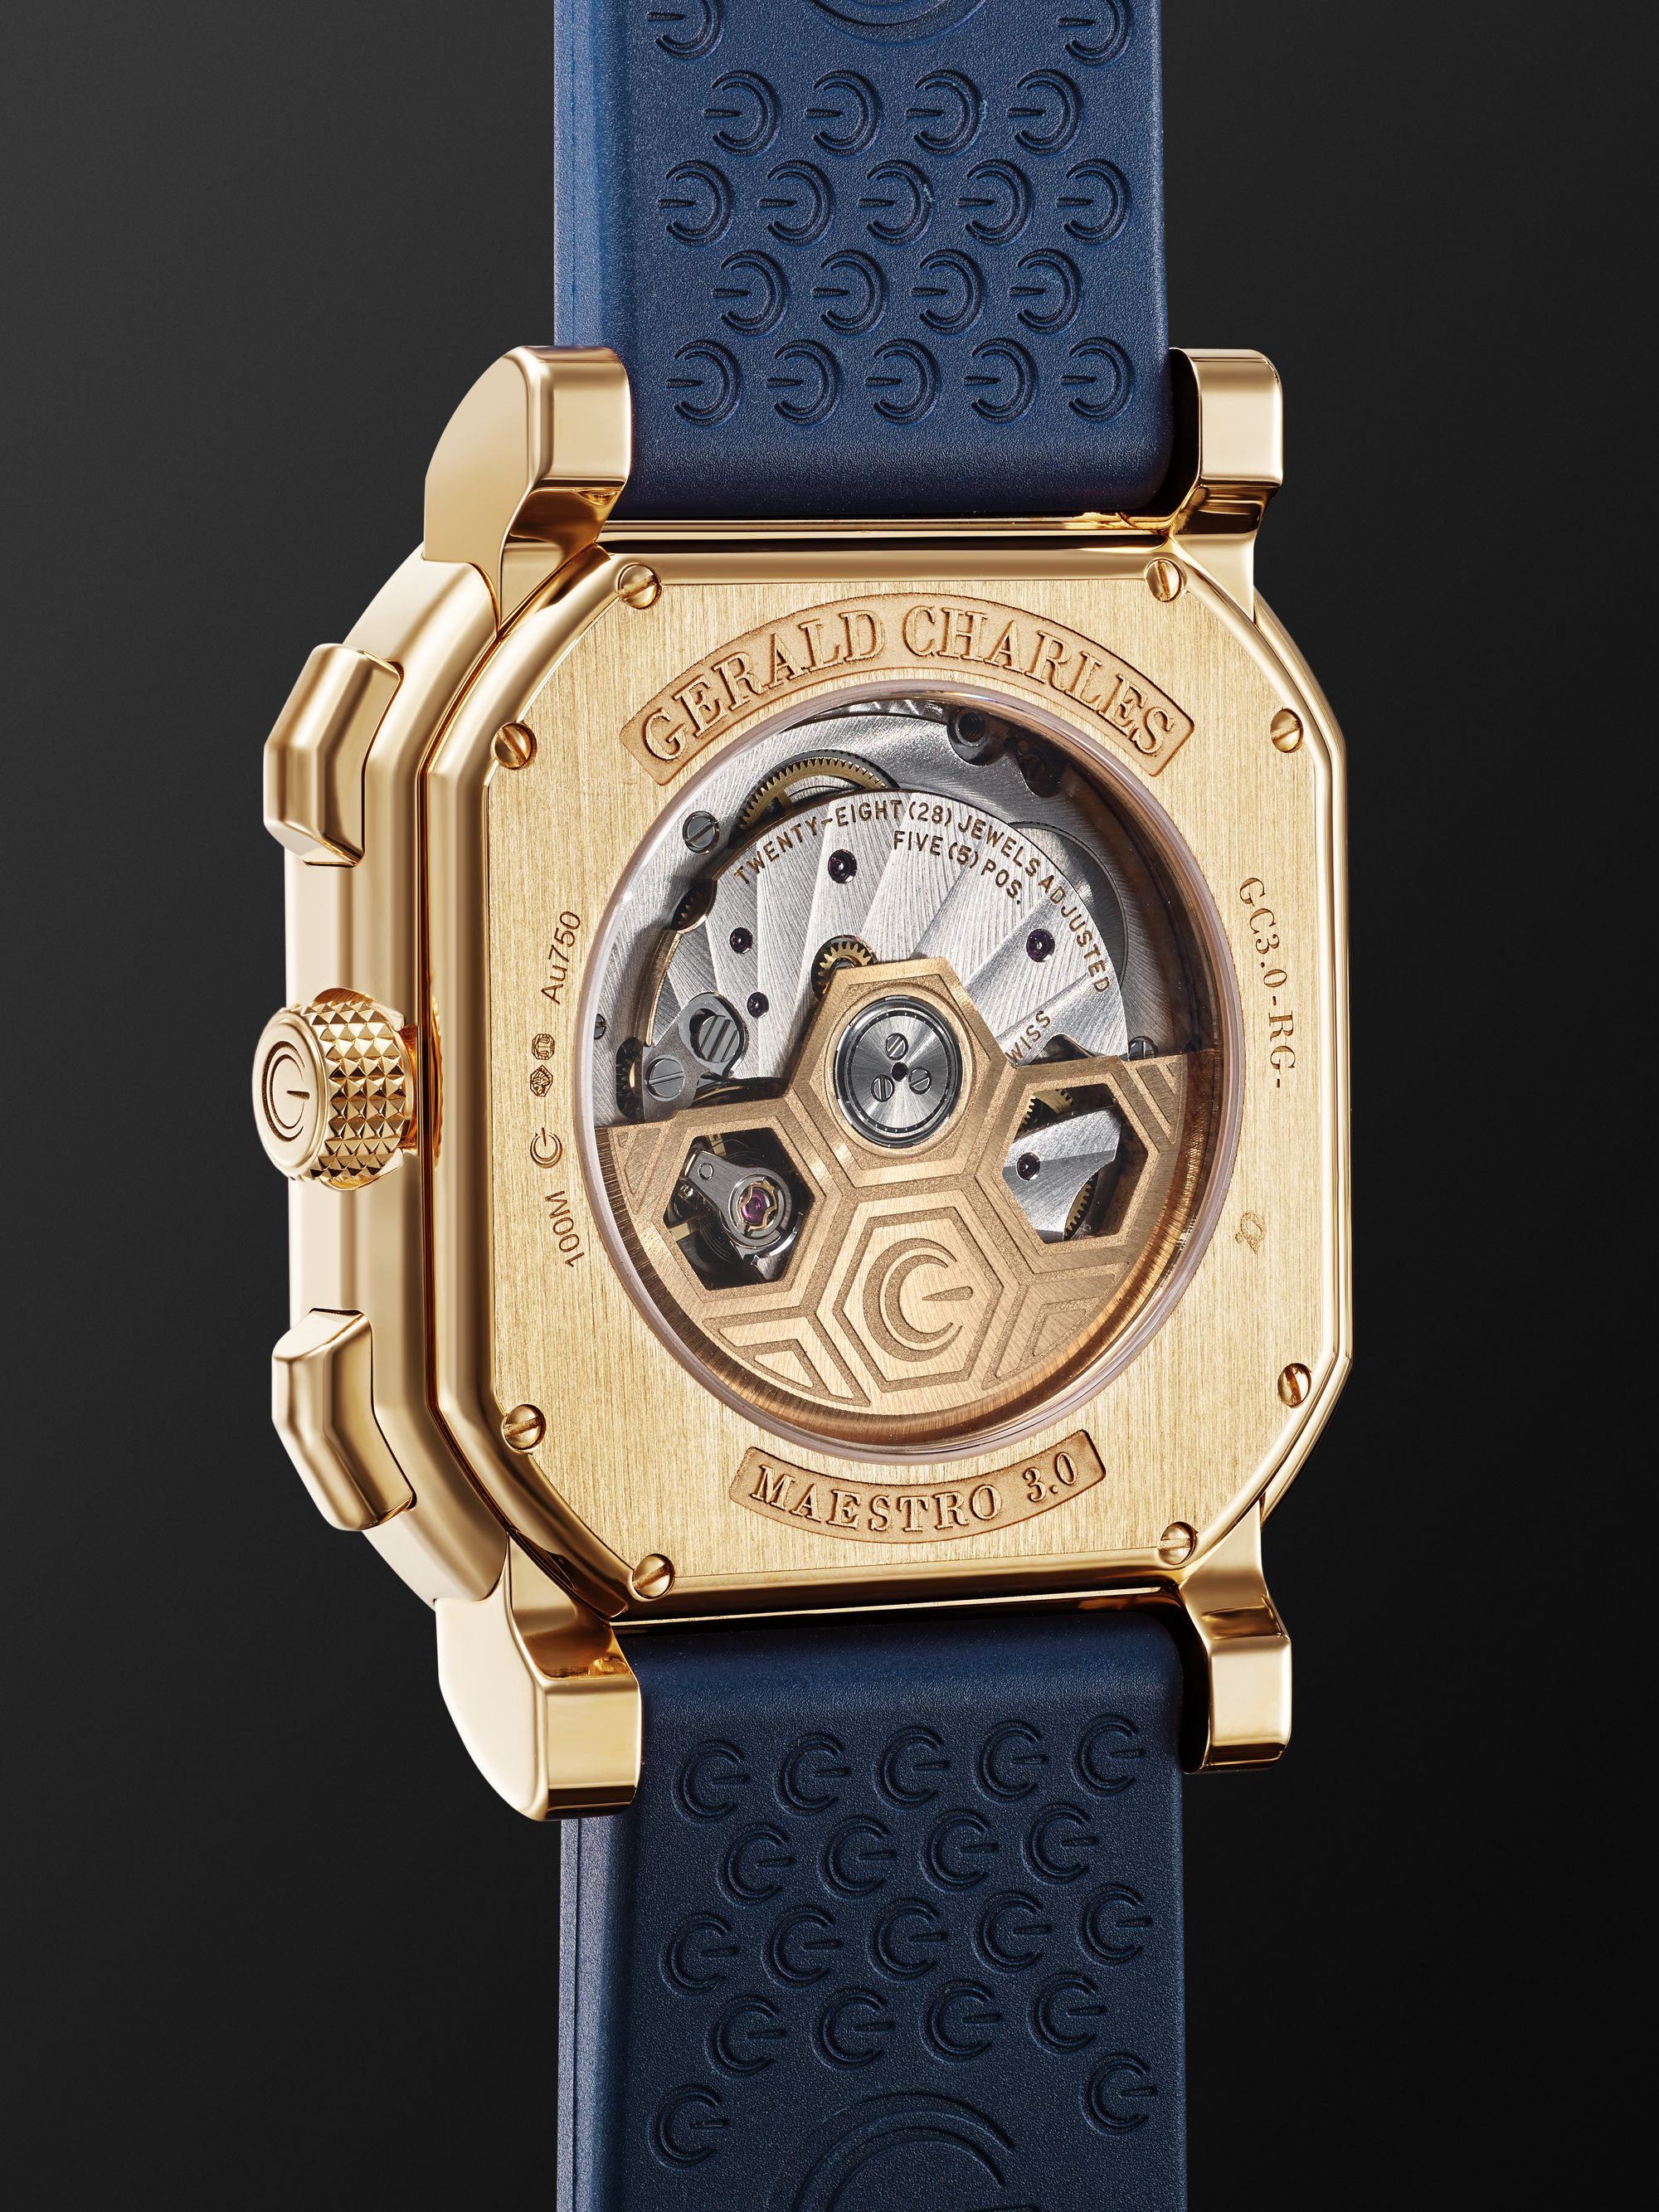 GERALD CHARLES Maestro 3.0 Automatic Chronograph 28mm 18-Karat Rose Gold and Rubber Watch, Ref. No. GC3.0-RG-01